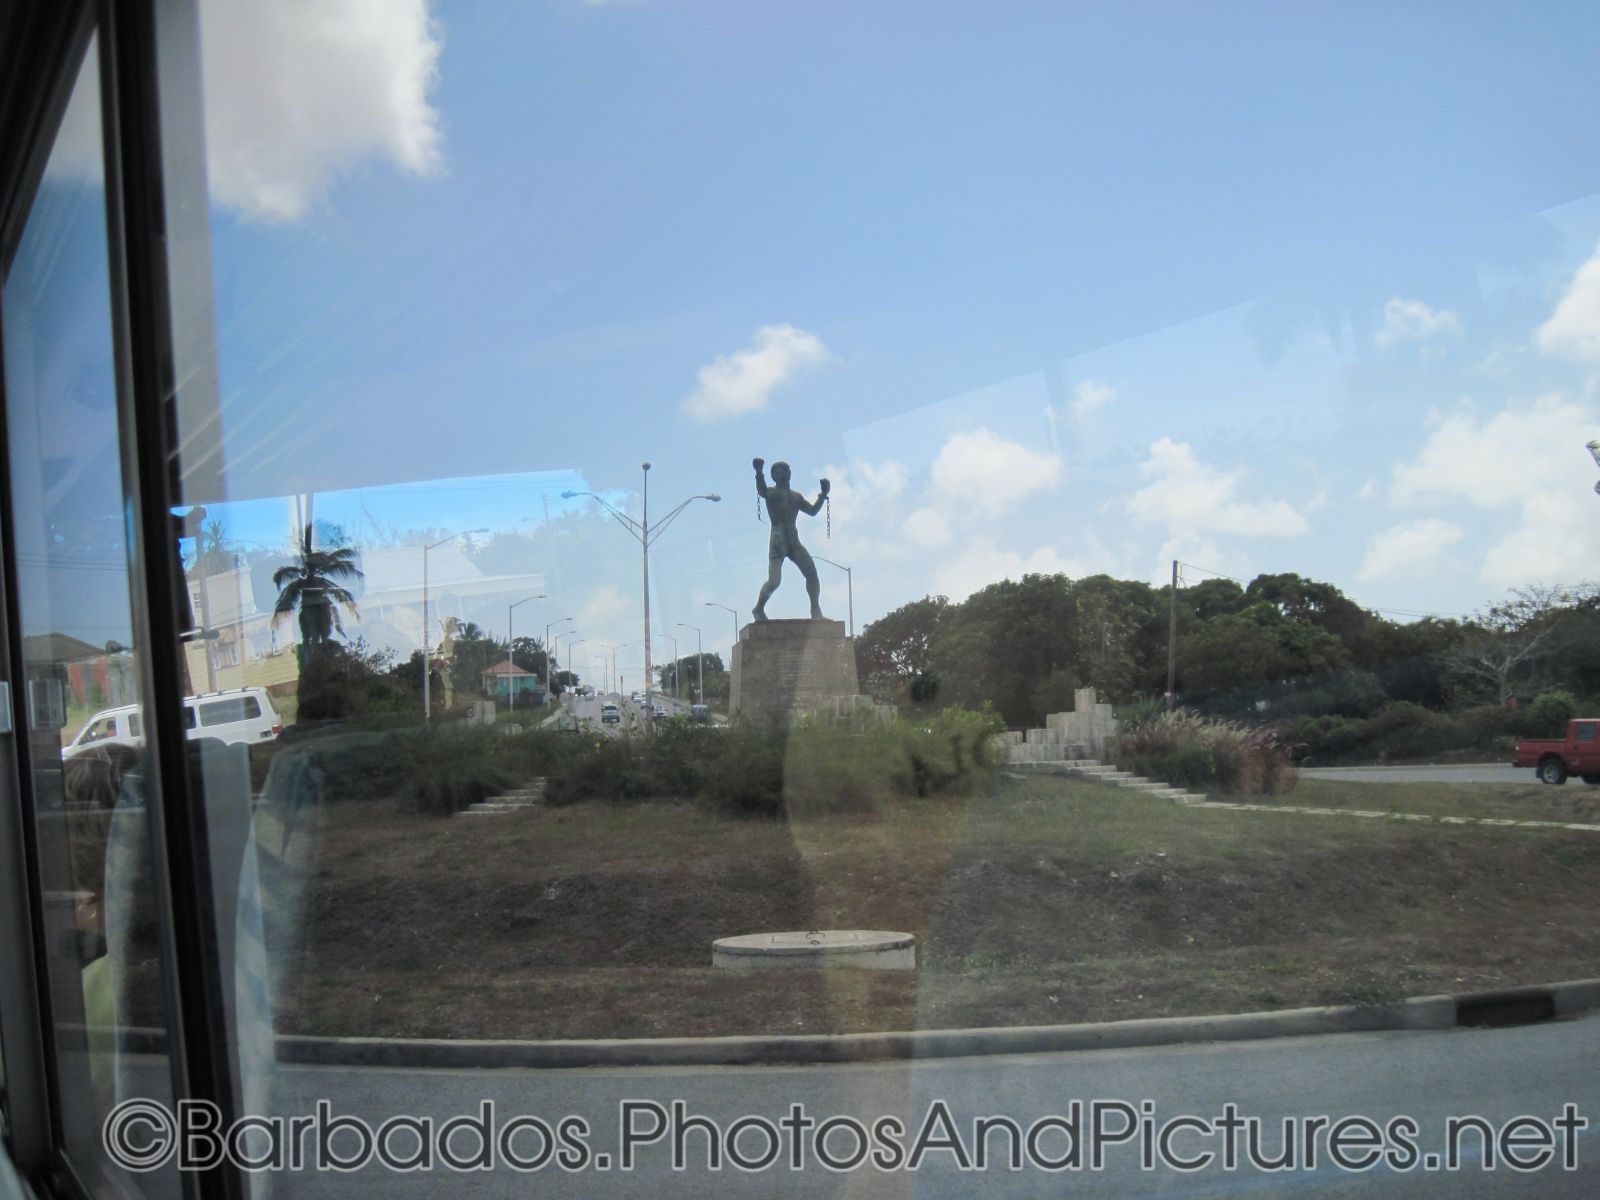 Statue at a roundabout in Barbados.jpg
